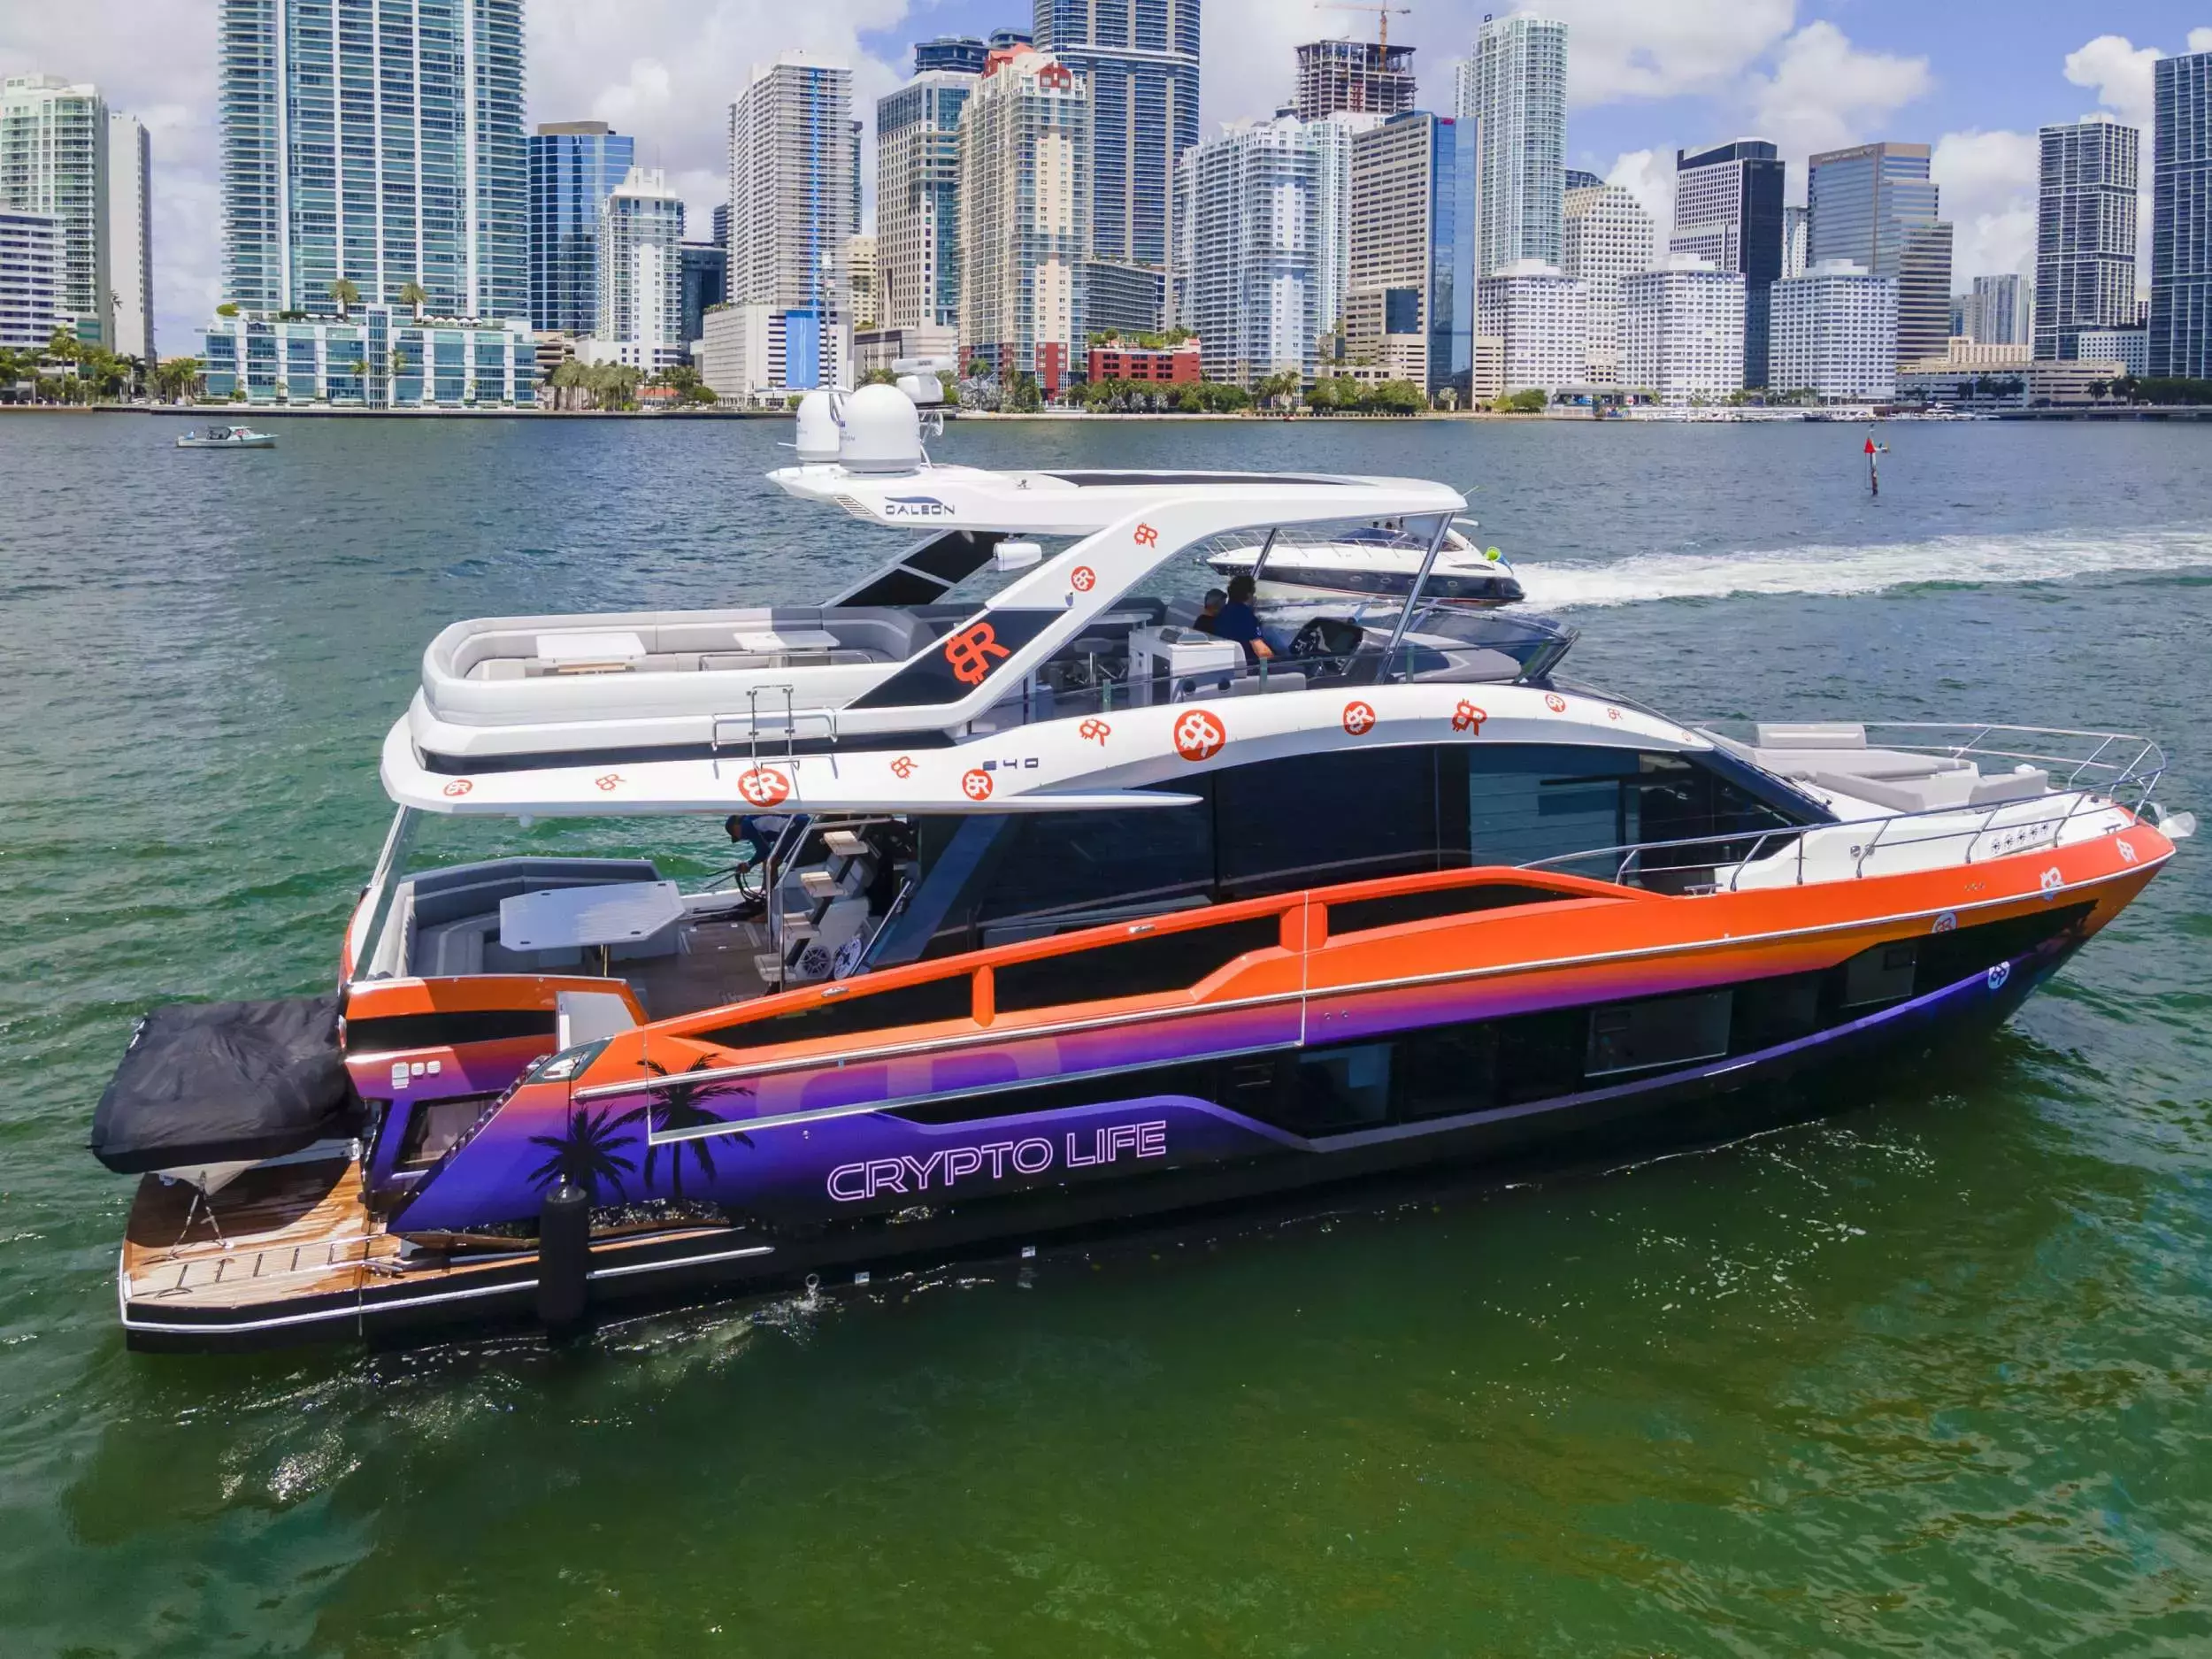 Crypto Life by Galeon - Top rates for a Charter of a private Motor Yacht in Bahamas